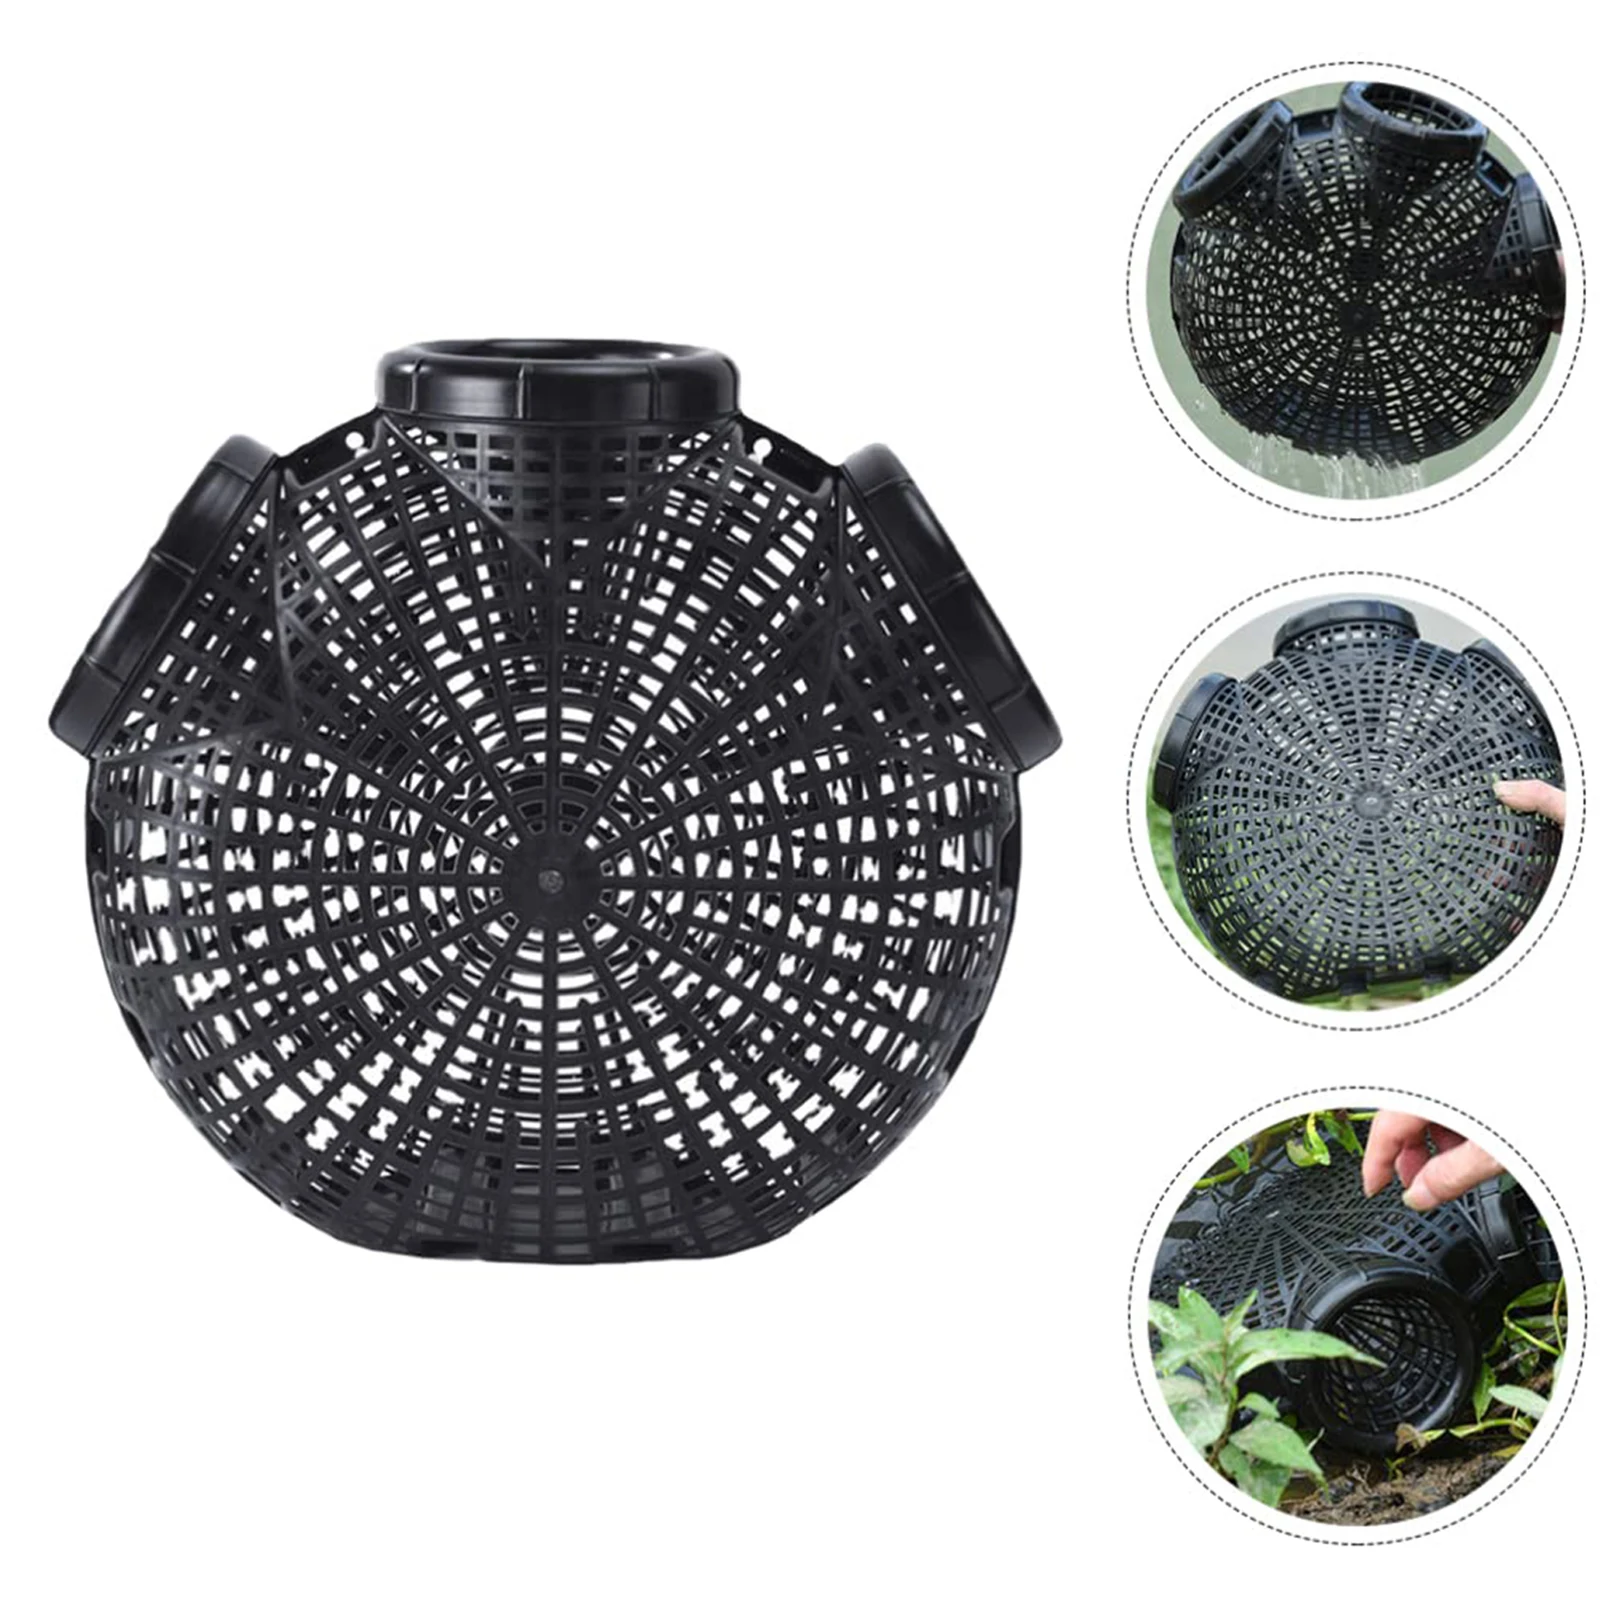 Fish Basket Fishing Durable Eel Trap Made Of PP Crayfish Traps For Lakes  For Catching Smelt Eels Crab Lobster Minnows Shrimp And - AliExpress